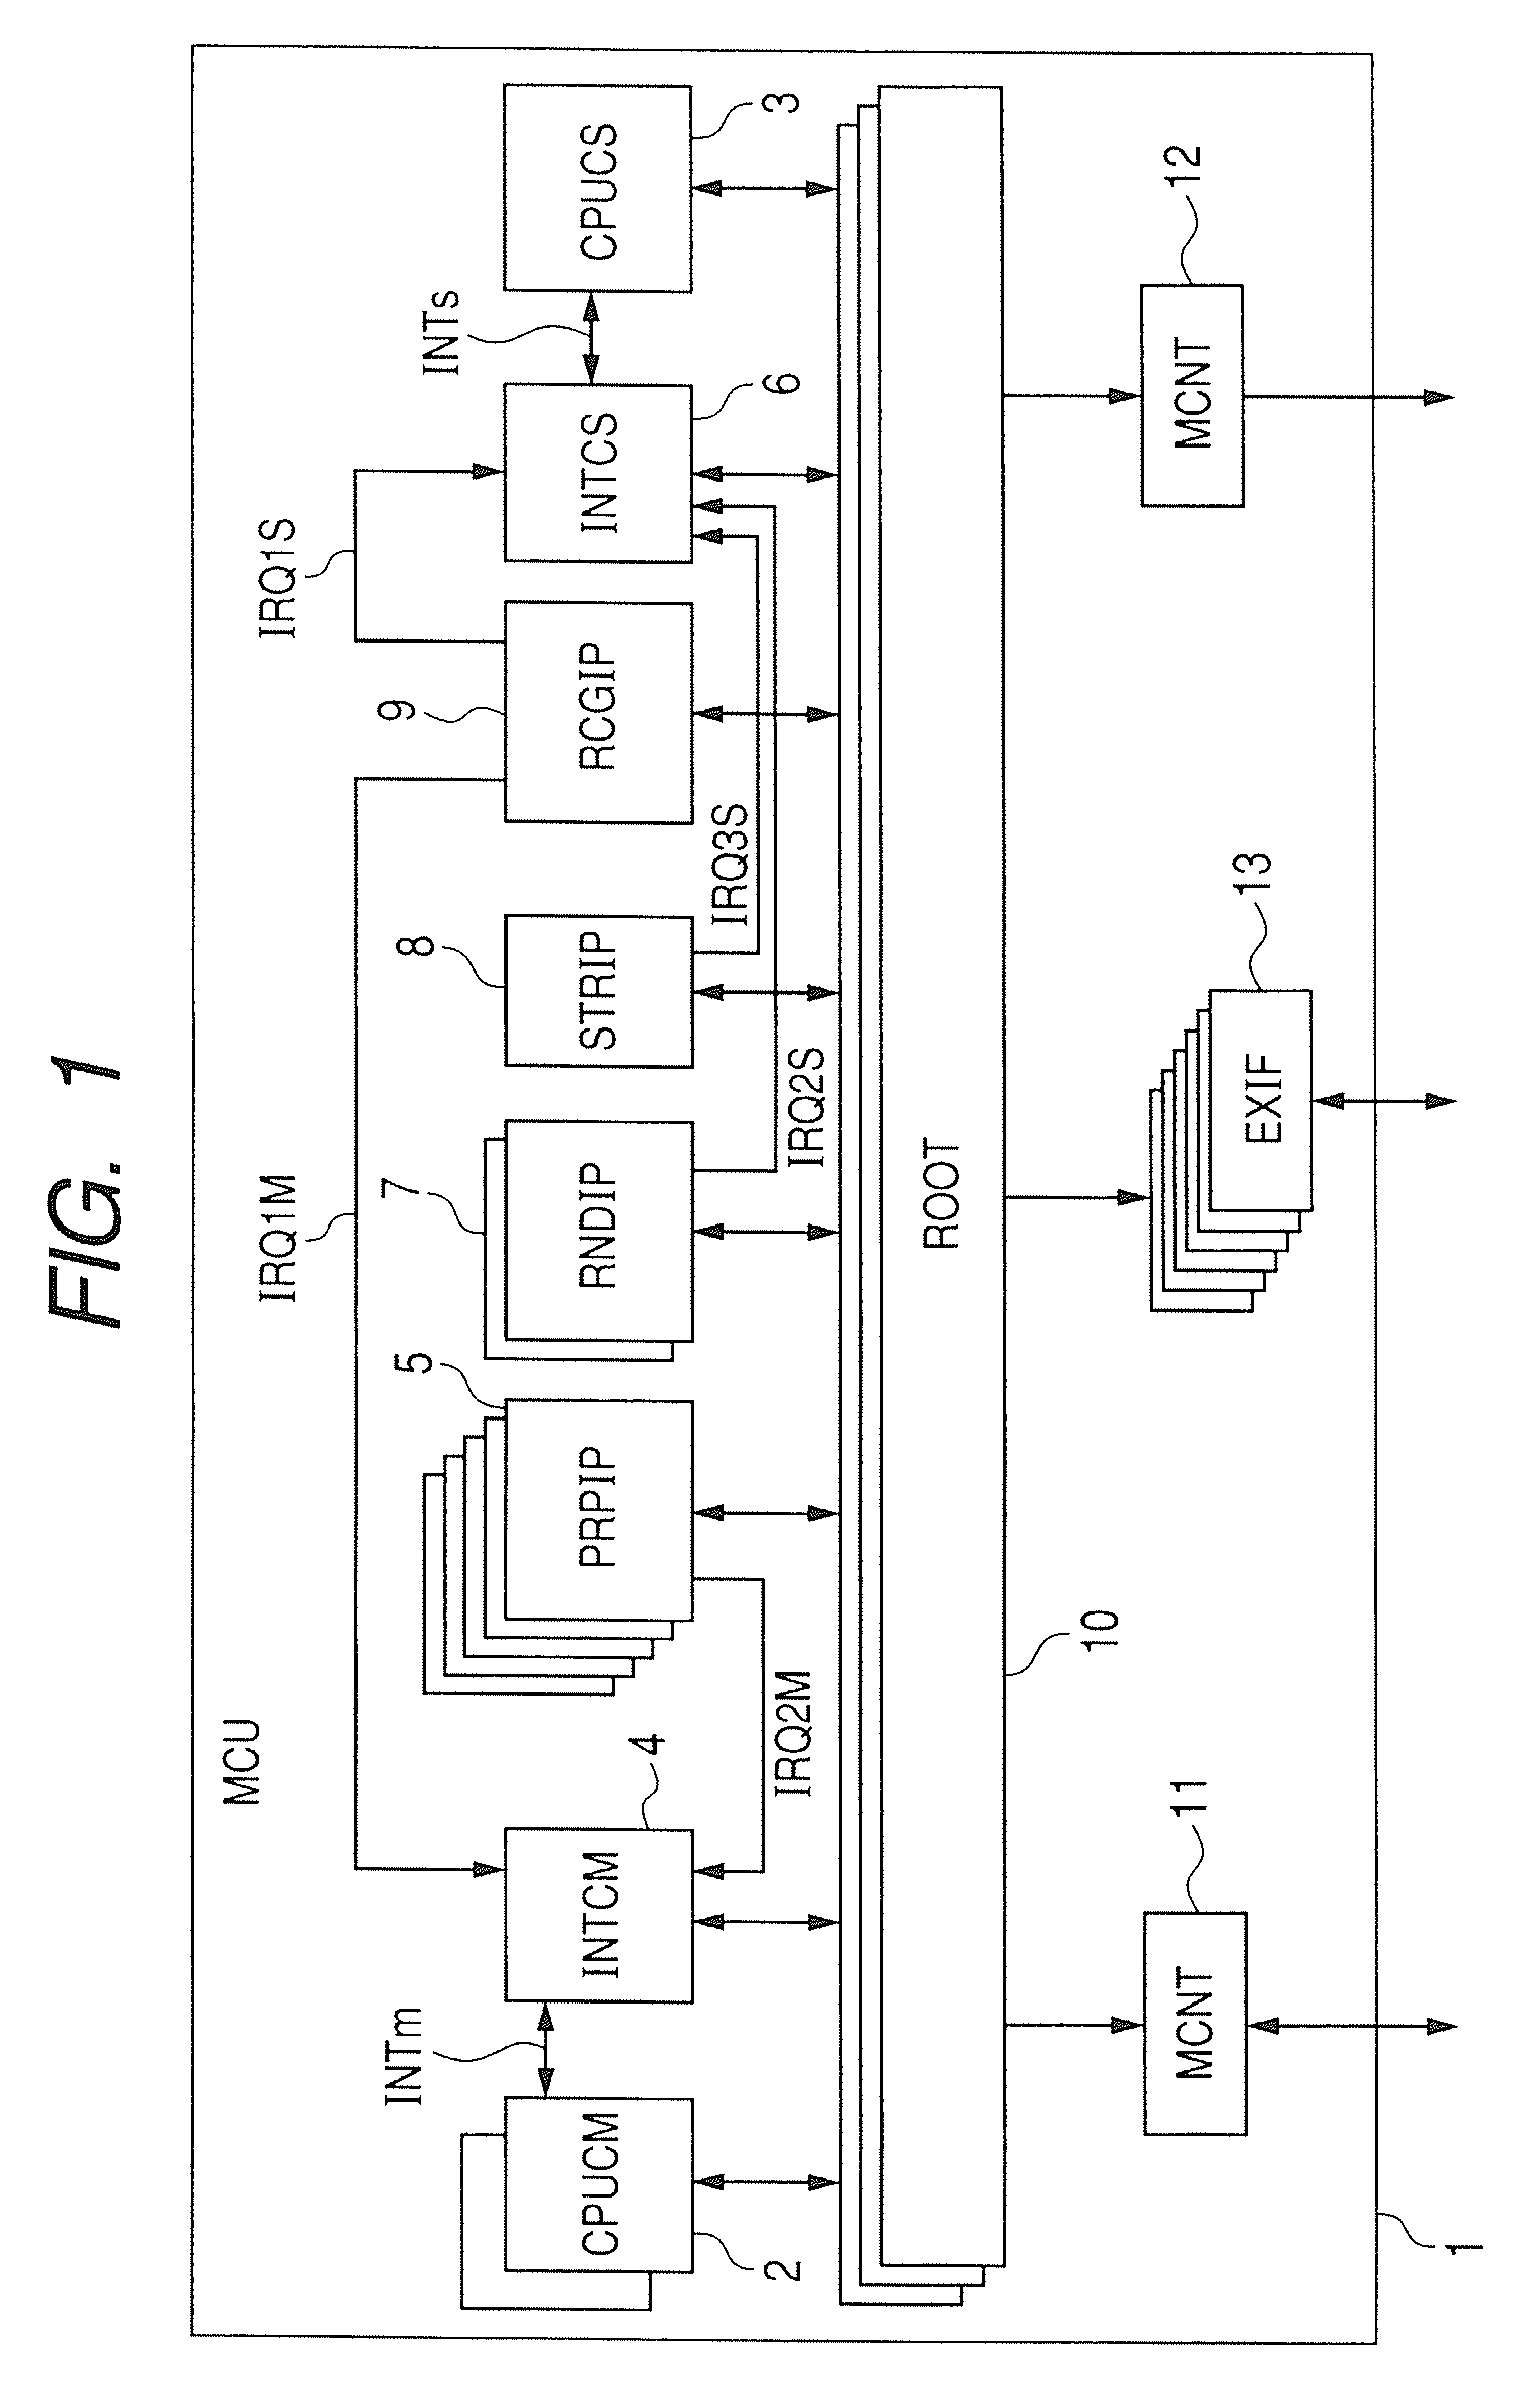 Data processing system and semicondutor integrated circuit